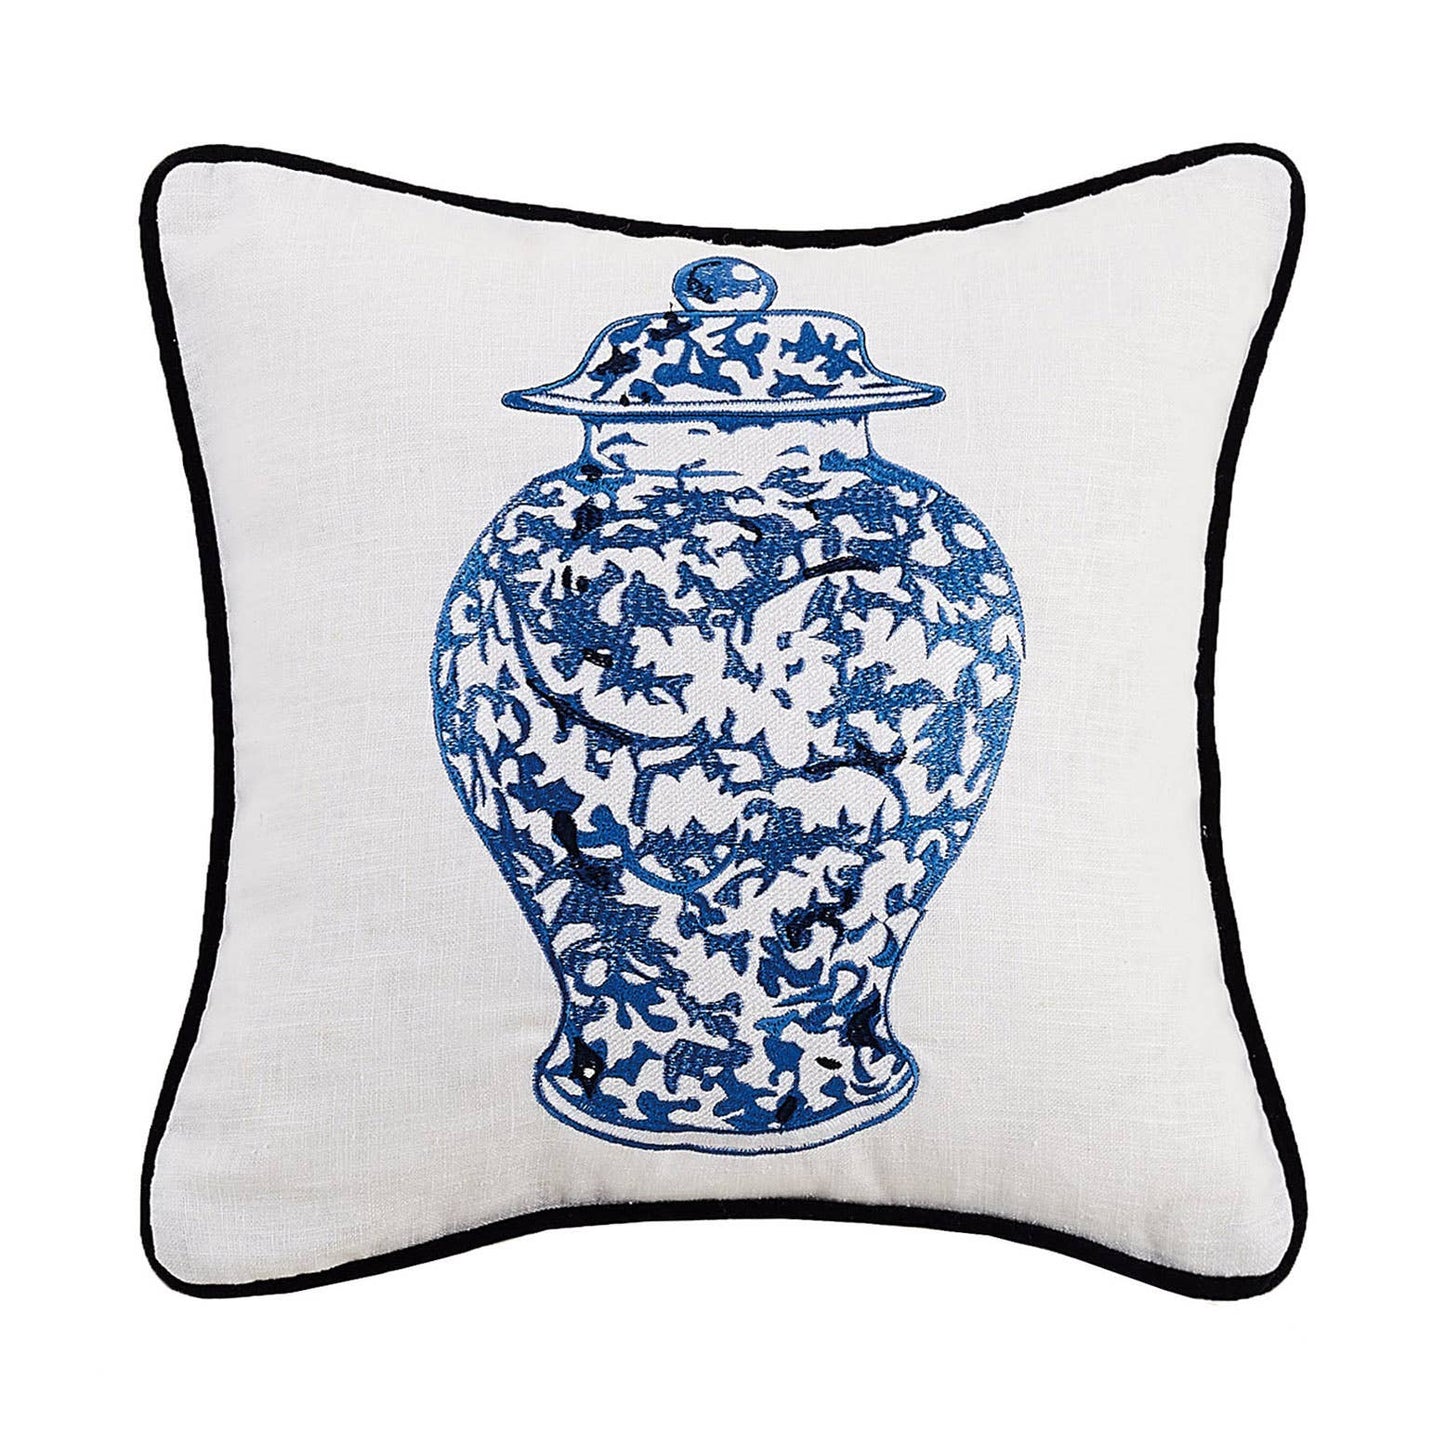 Chinoiserie Vase With Lid Embroidered Pillow